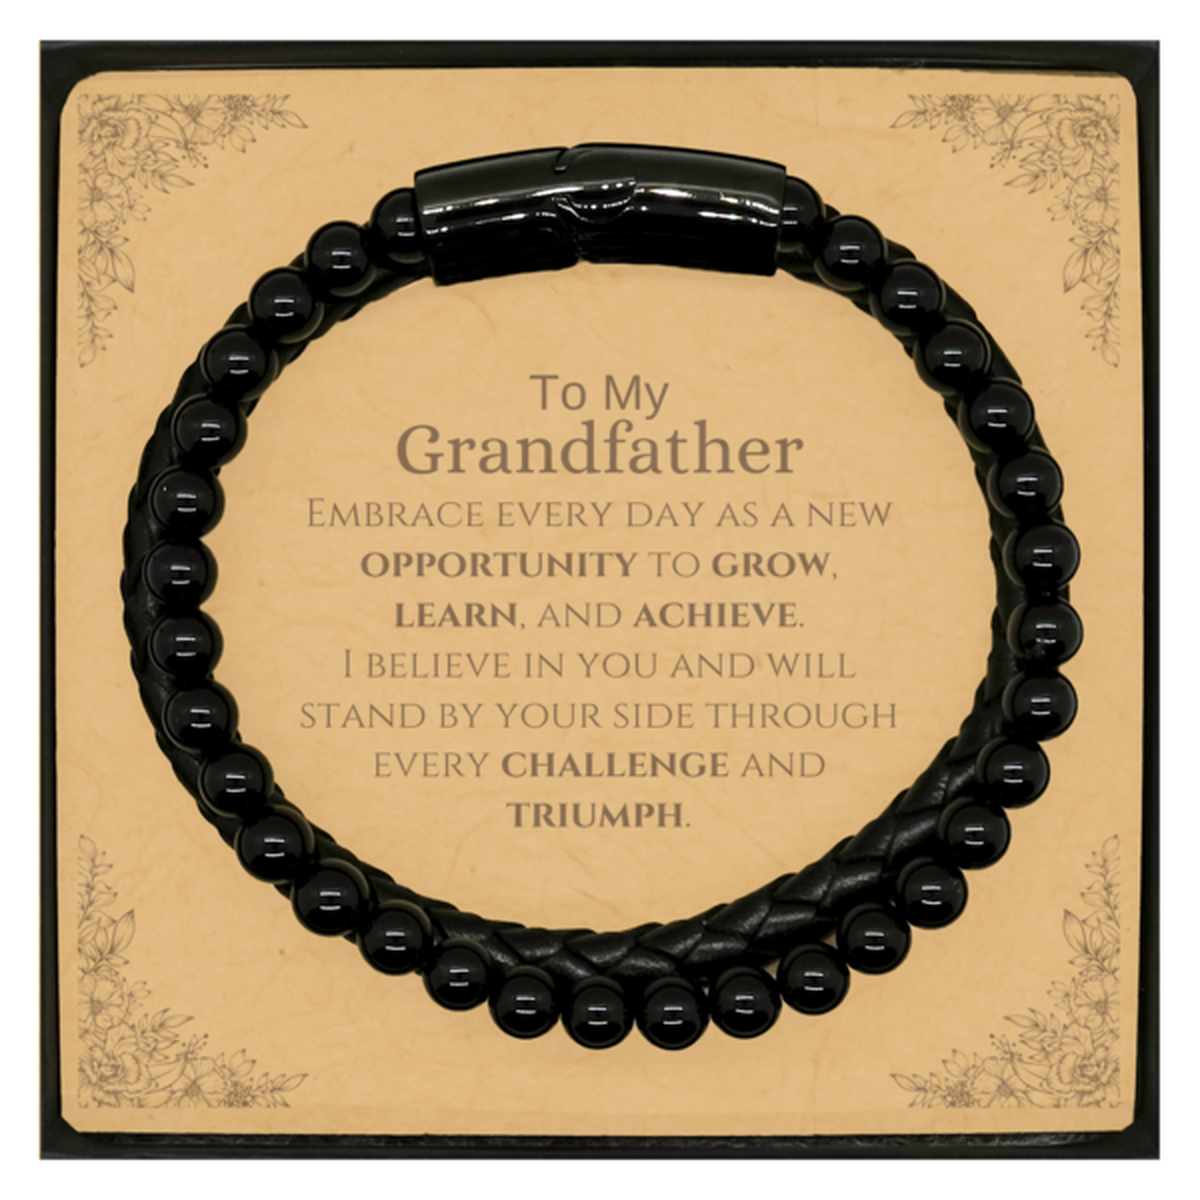 To My Grandfather Gifts, I believe in you and will stand by your side, Inspirational Stone Leather Bracelets For Grandfather, Birthday Christmas Motivational Grandfather Gifts